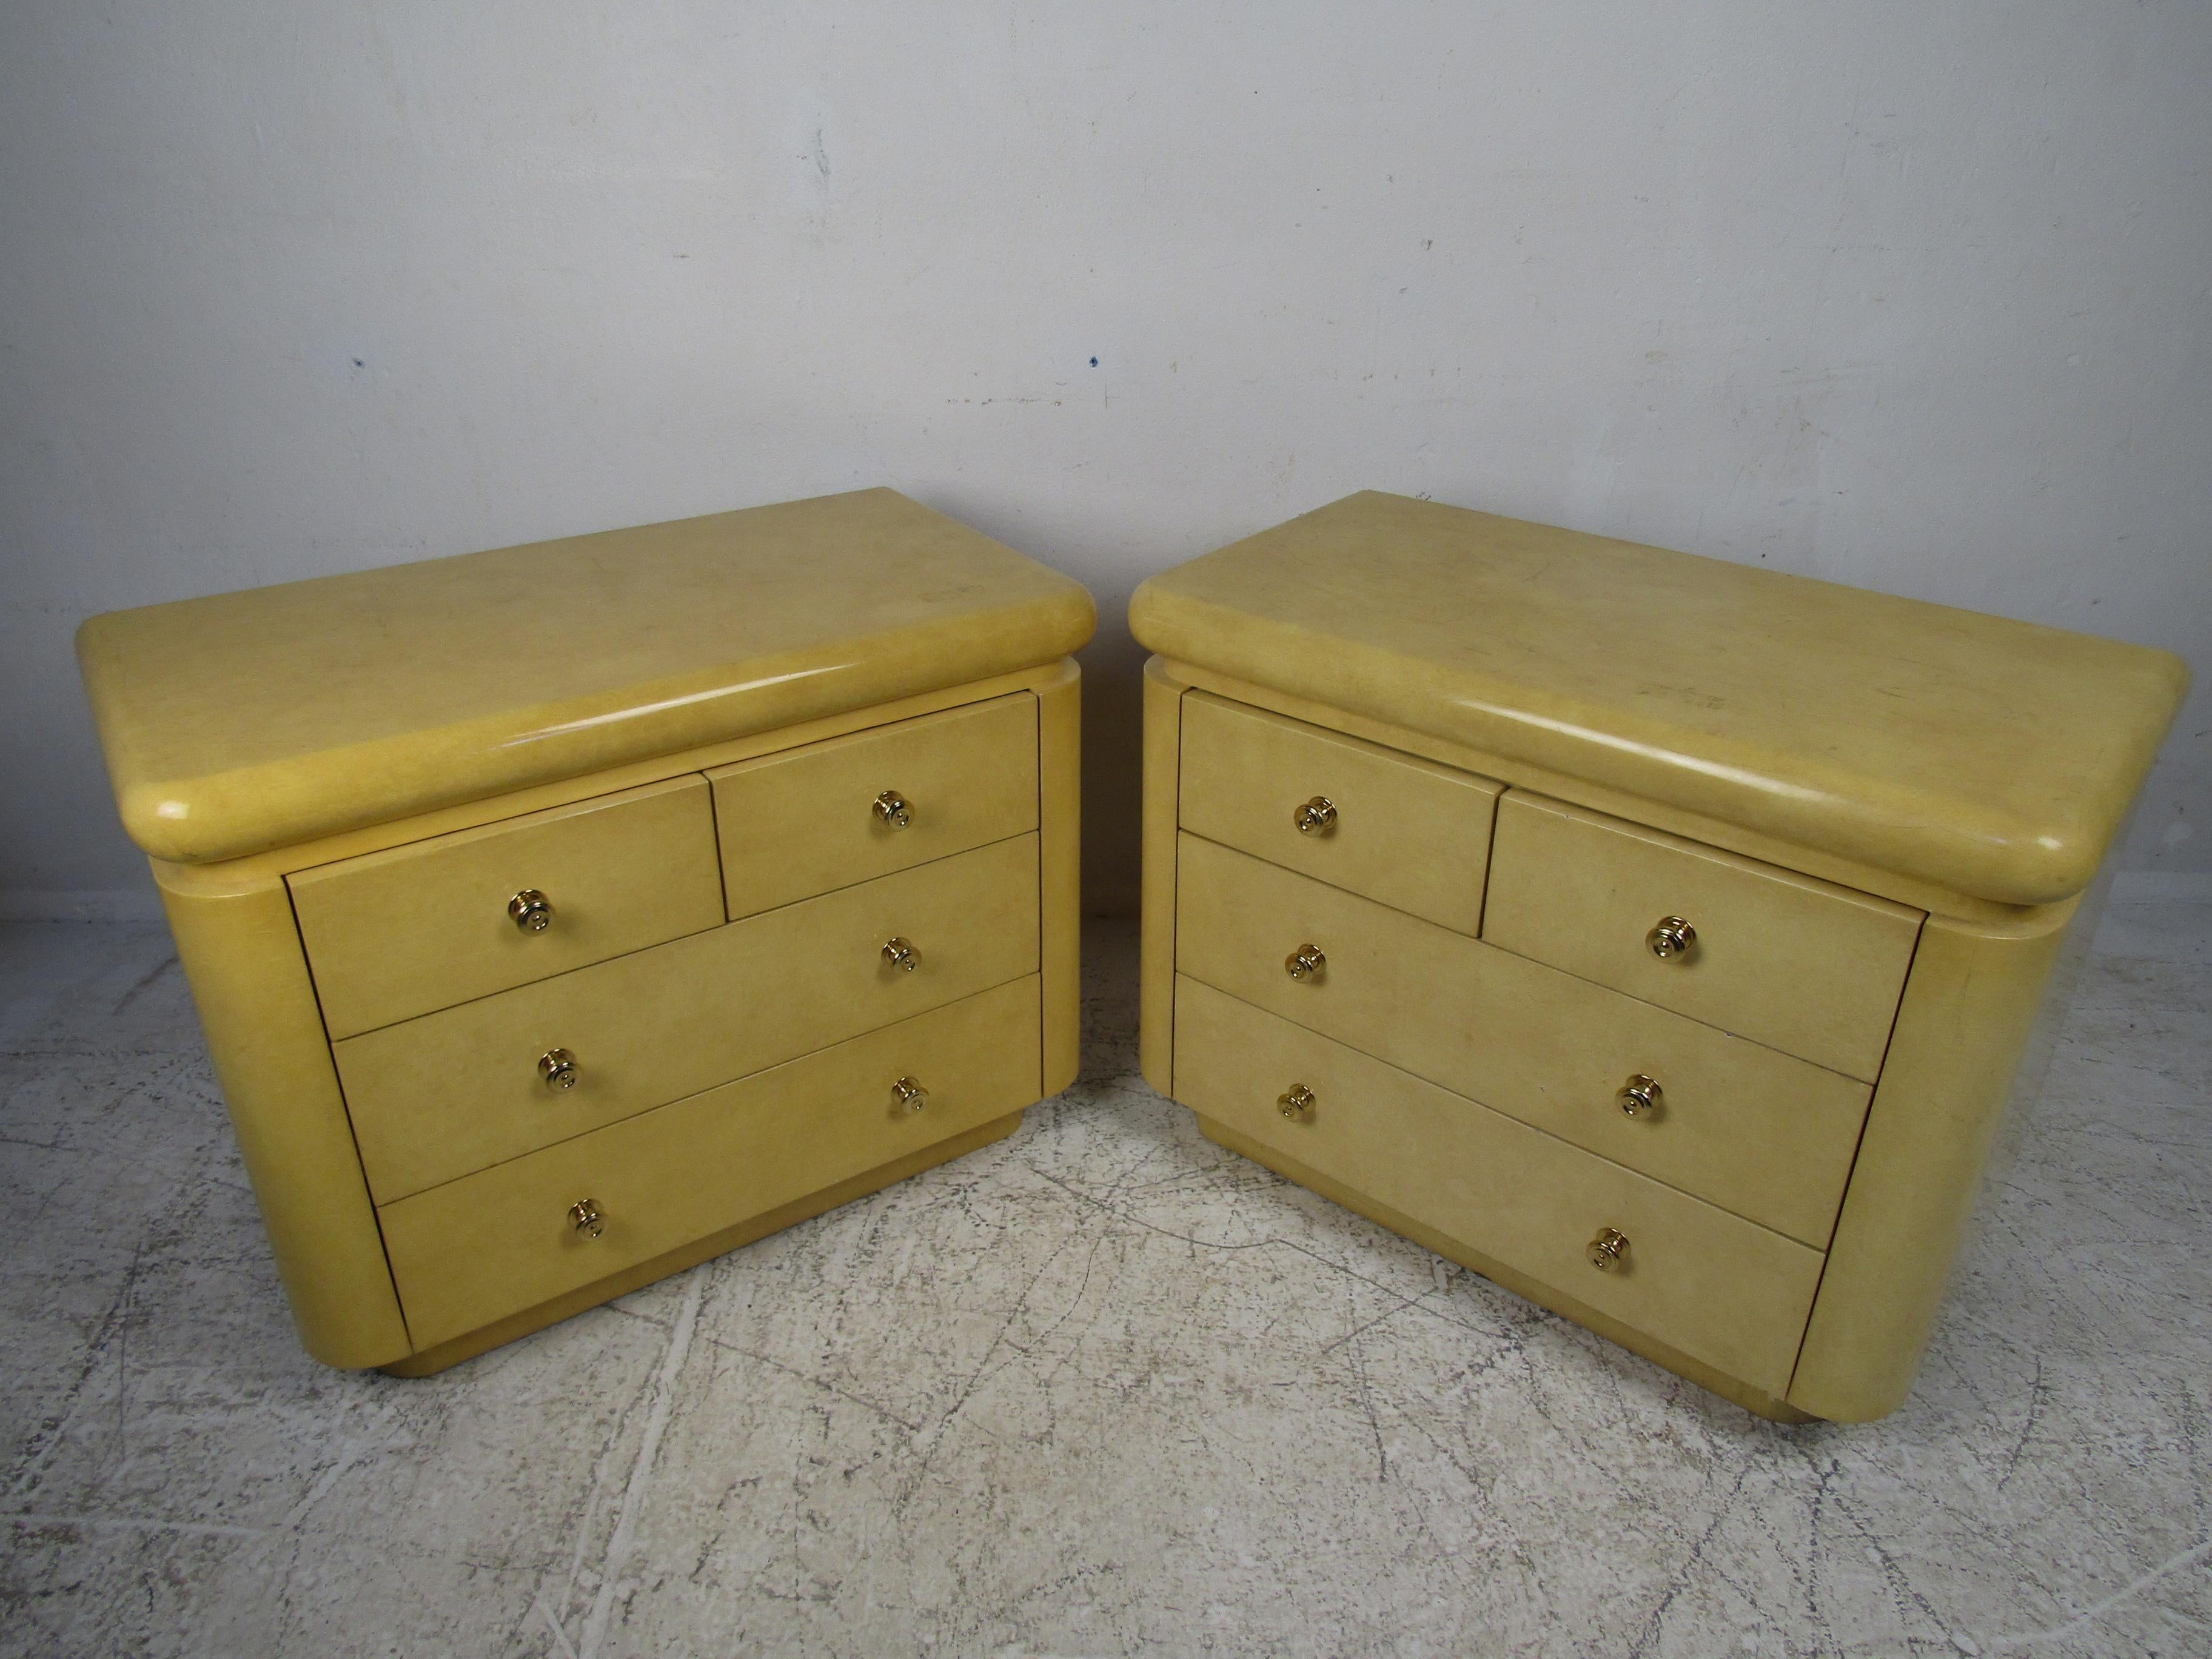 This elegant pair of vintage modern nightstands feature plenty of room for storage within its many drawers. A wonderful design covered in lacquered goatskin with unusual brass handles. A uniquely shaped pair that is sure to add style and grace to